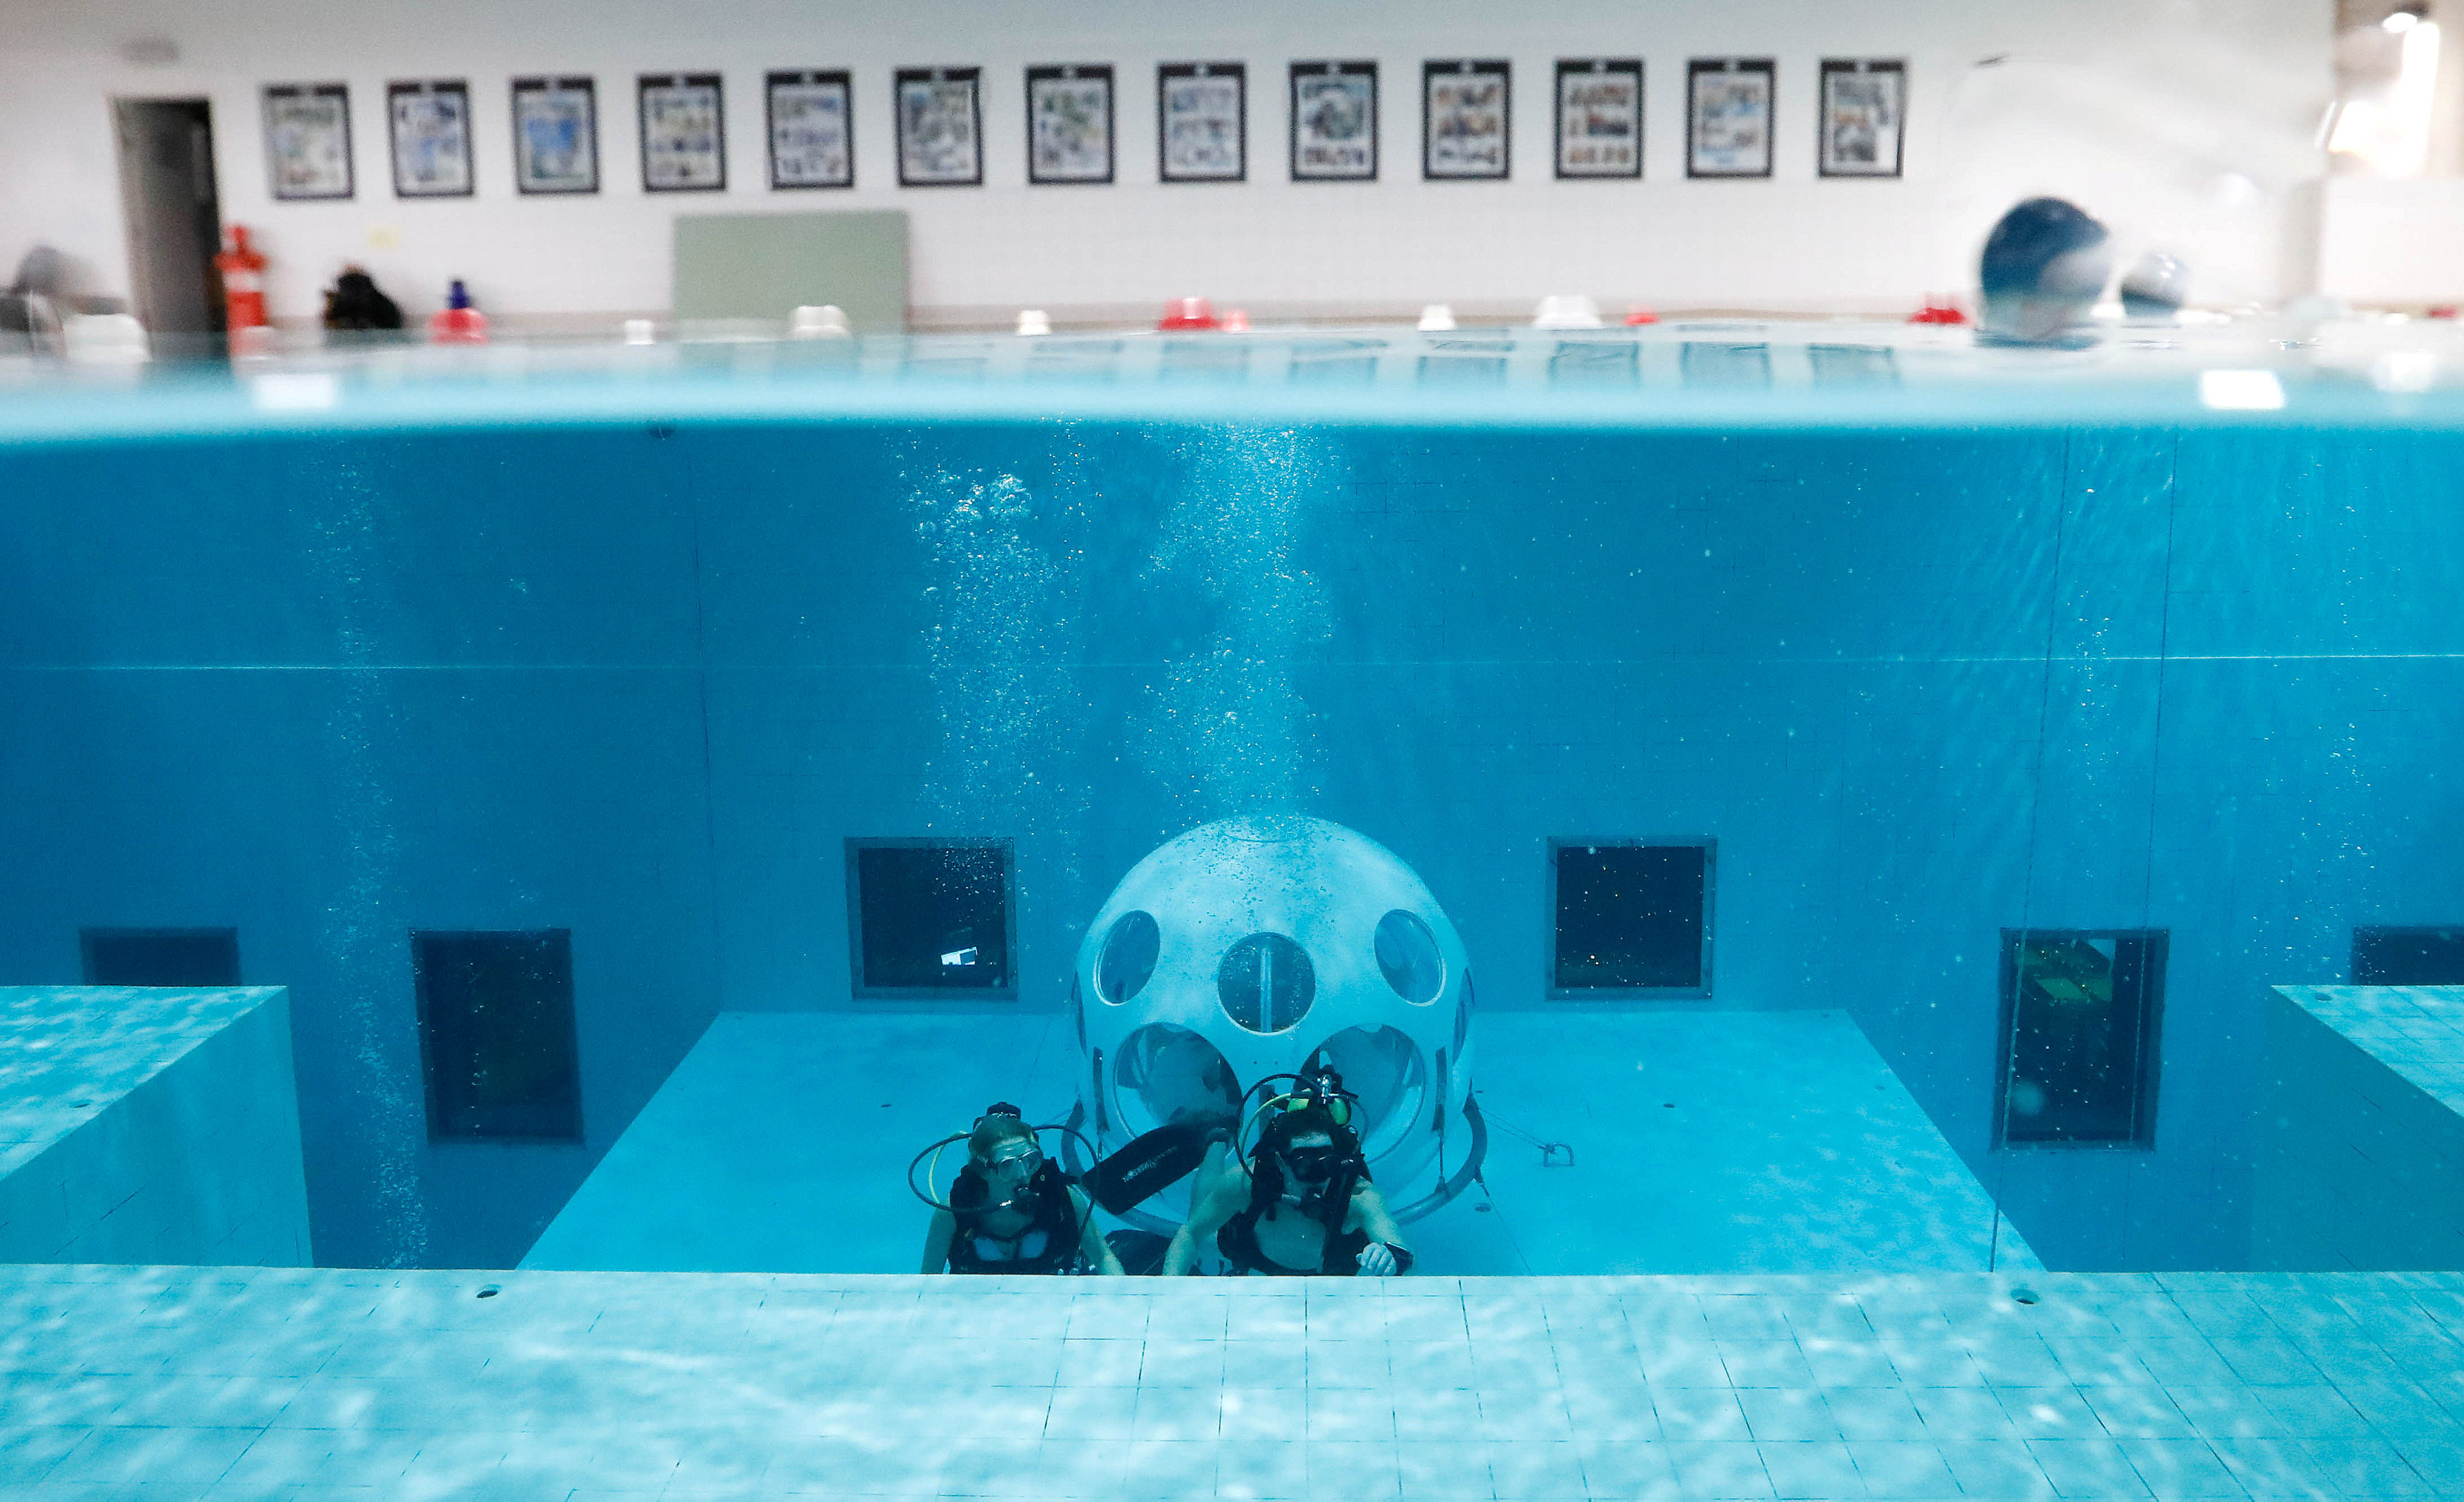 Belgians Florence Lutje Spelberg and Nicolas Mouchart dive next to "The Pearl", a spheric dining room placed 5 metres underwater in the NEMO33 diving center, one of the world's deepest pools (33 metre/36 yards) built to train professional divers, before enjoying a meal inside, in Brussels, Belgium January 30, 2017. Picture taken January 30, 2017   REUTERS/Yves Herman